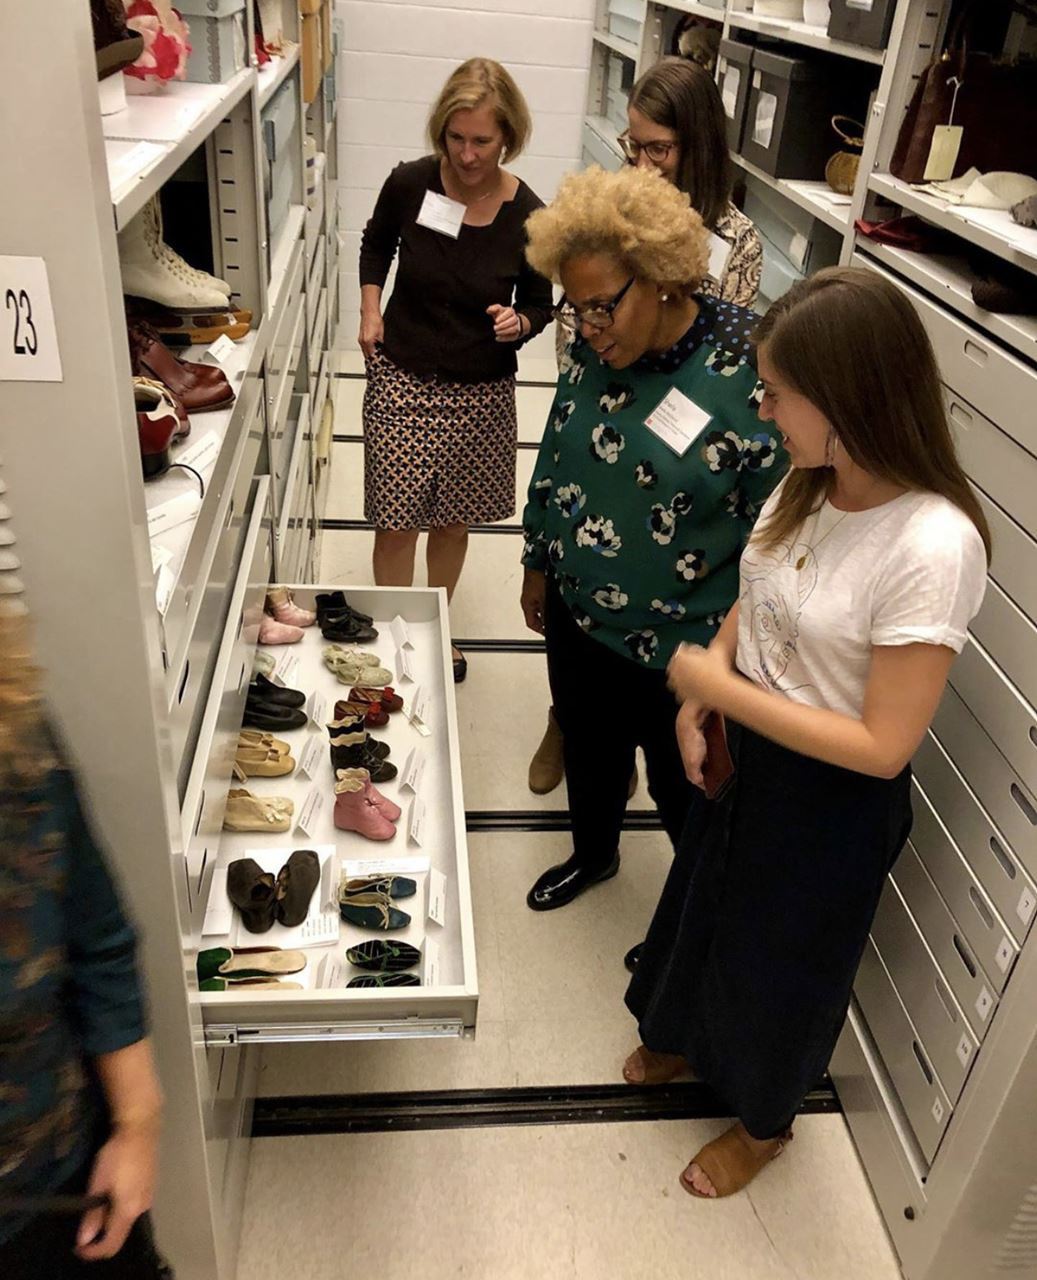 Thank you to the @albanyinstitute for hosting our October MANY Board Meeting and to CuratorMANY Board Member Diane Shewchuk for a look behind the scenes at the collections storage and of the Schuyler Sisters exhibition!